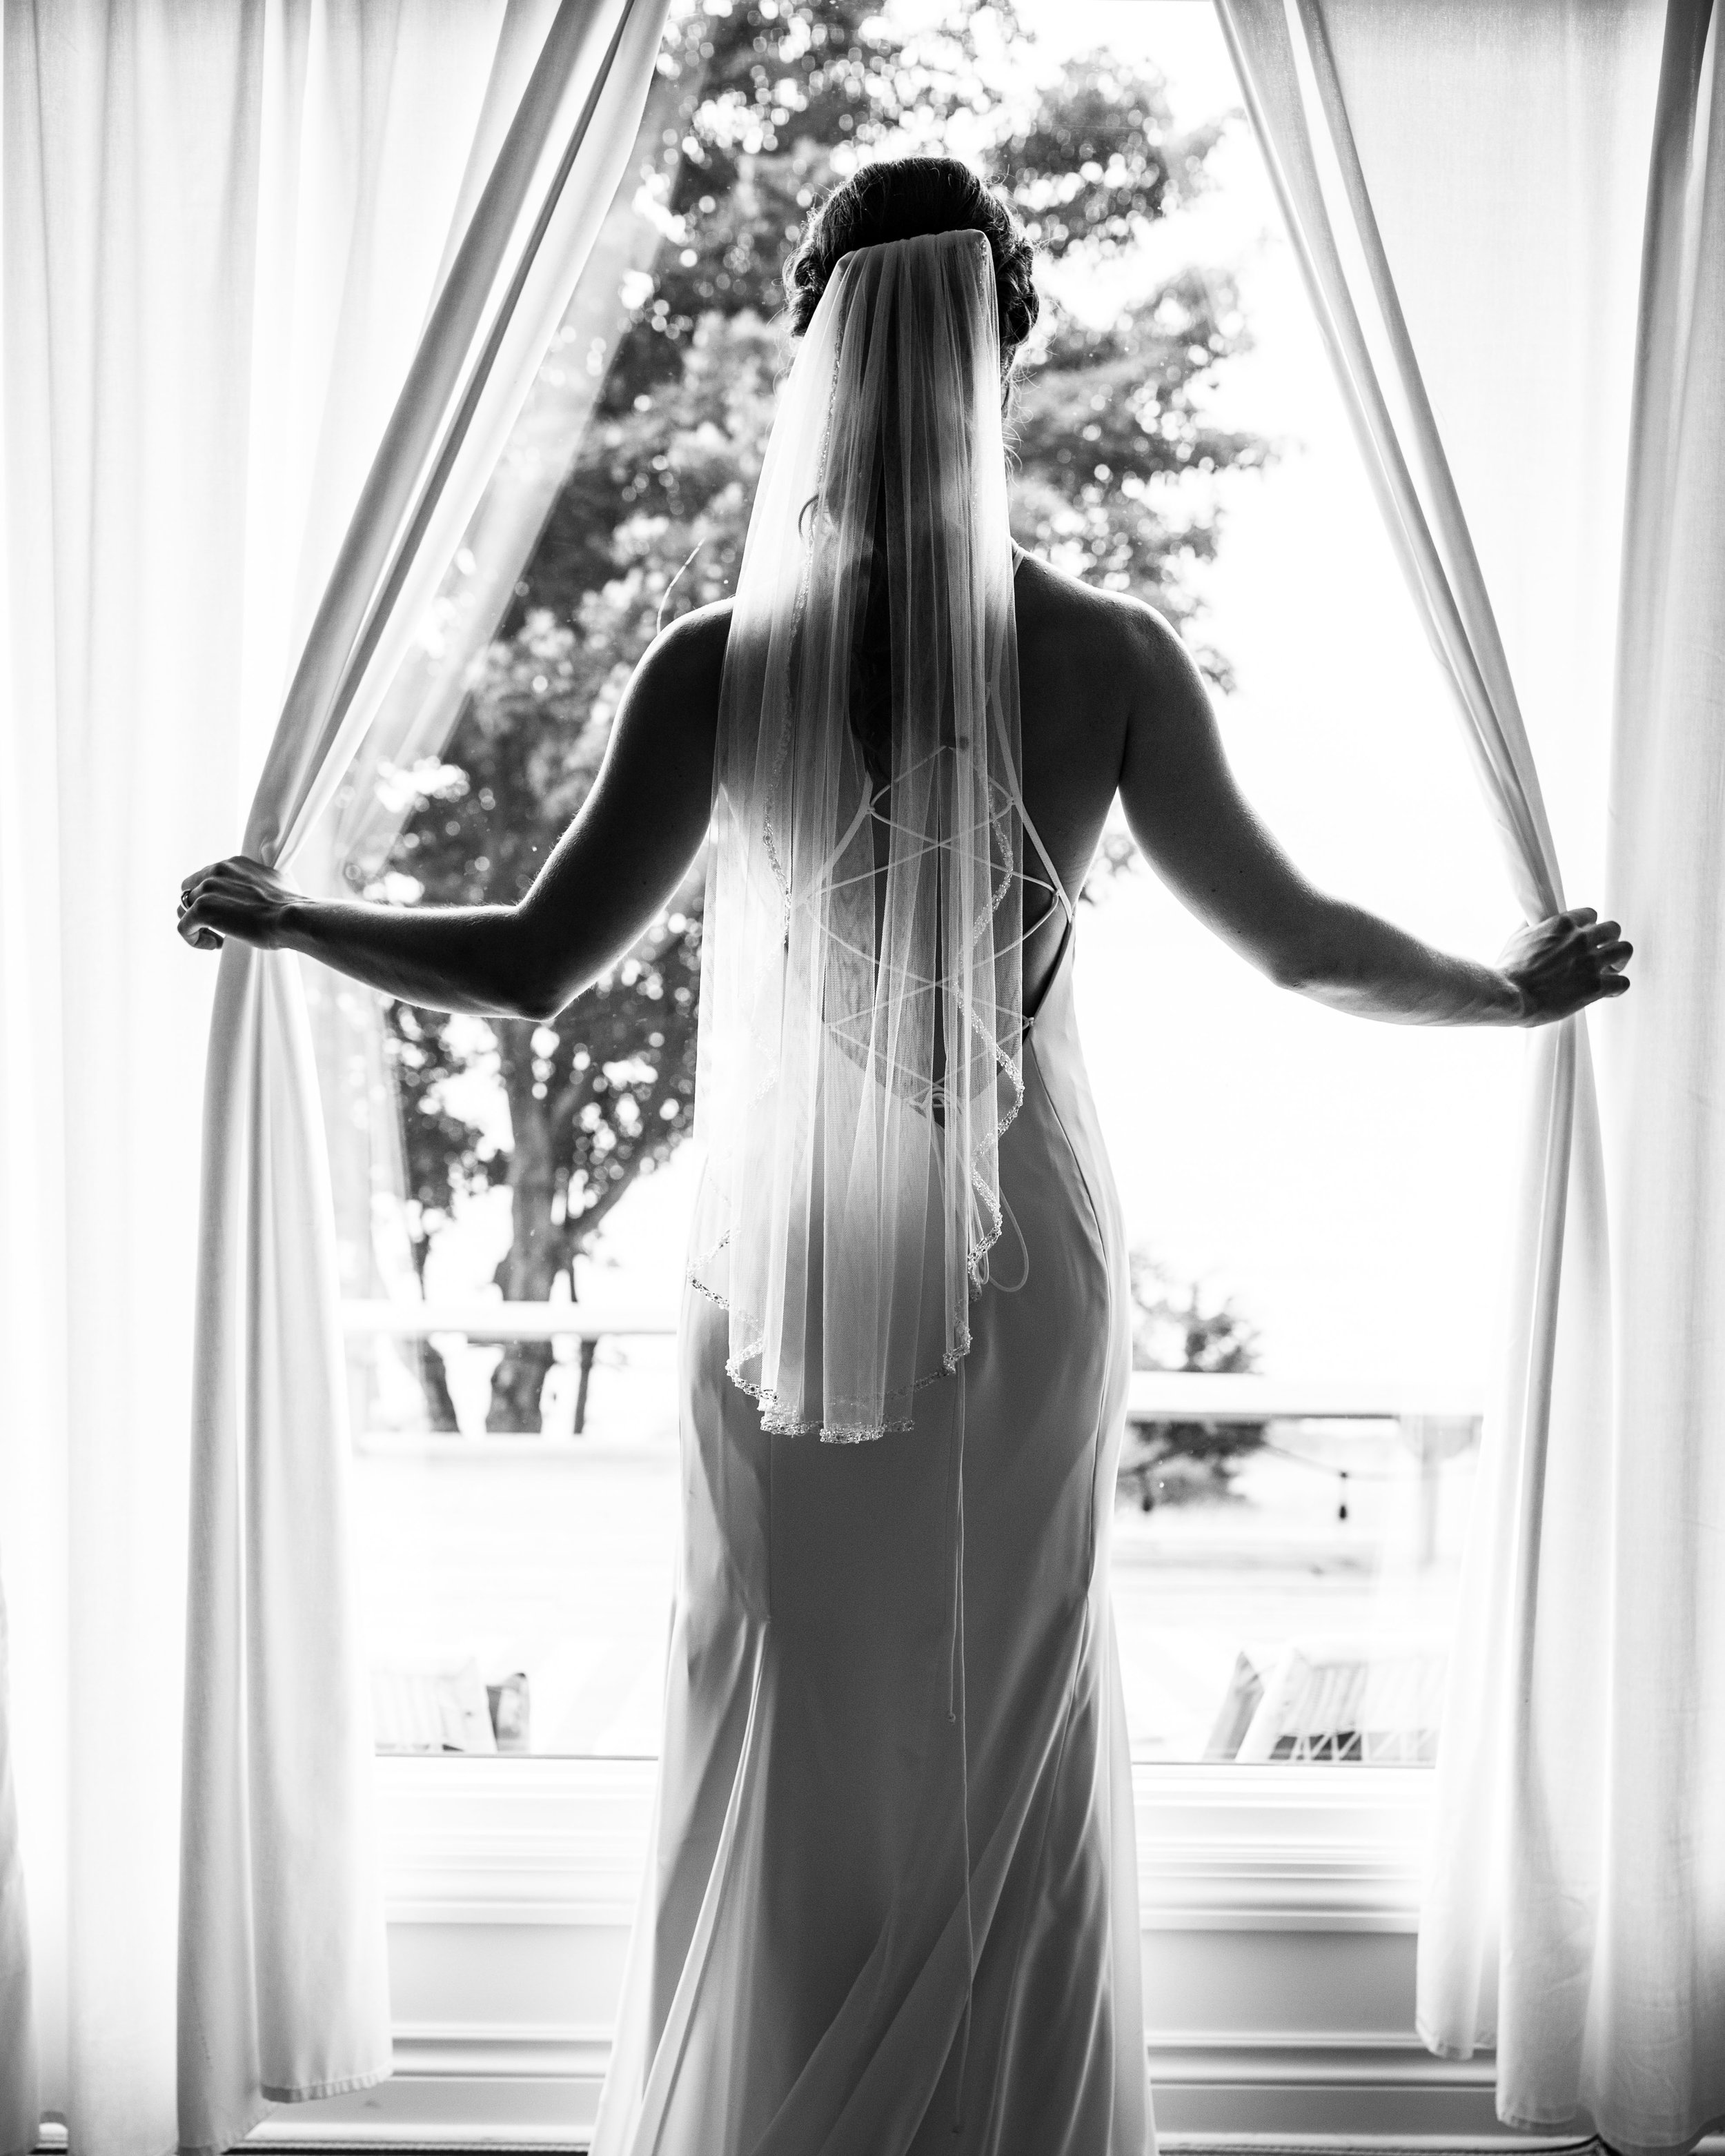  the bride stands in her white dress and veil, opening the curtains to watch the groom arrive 